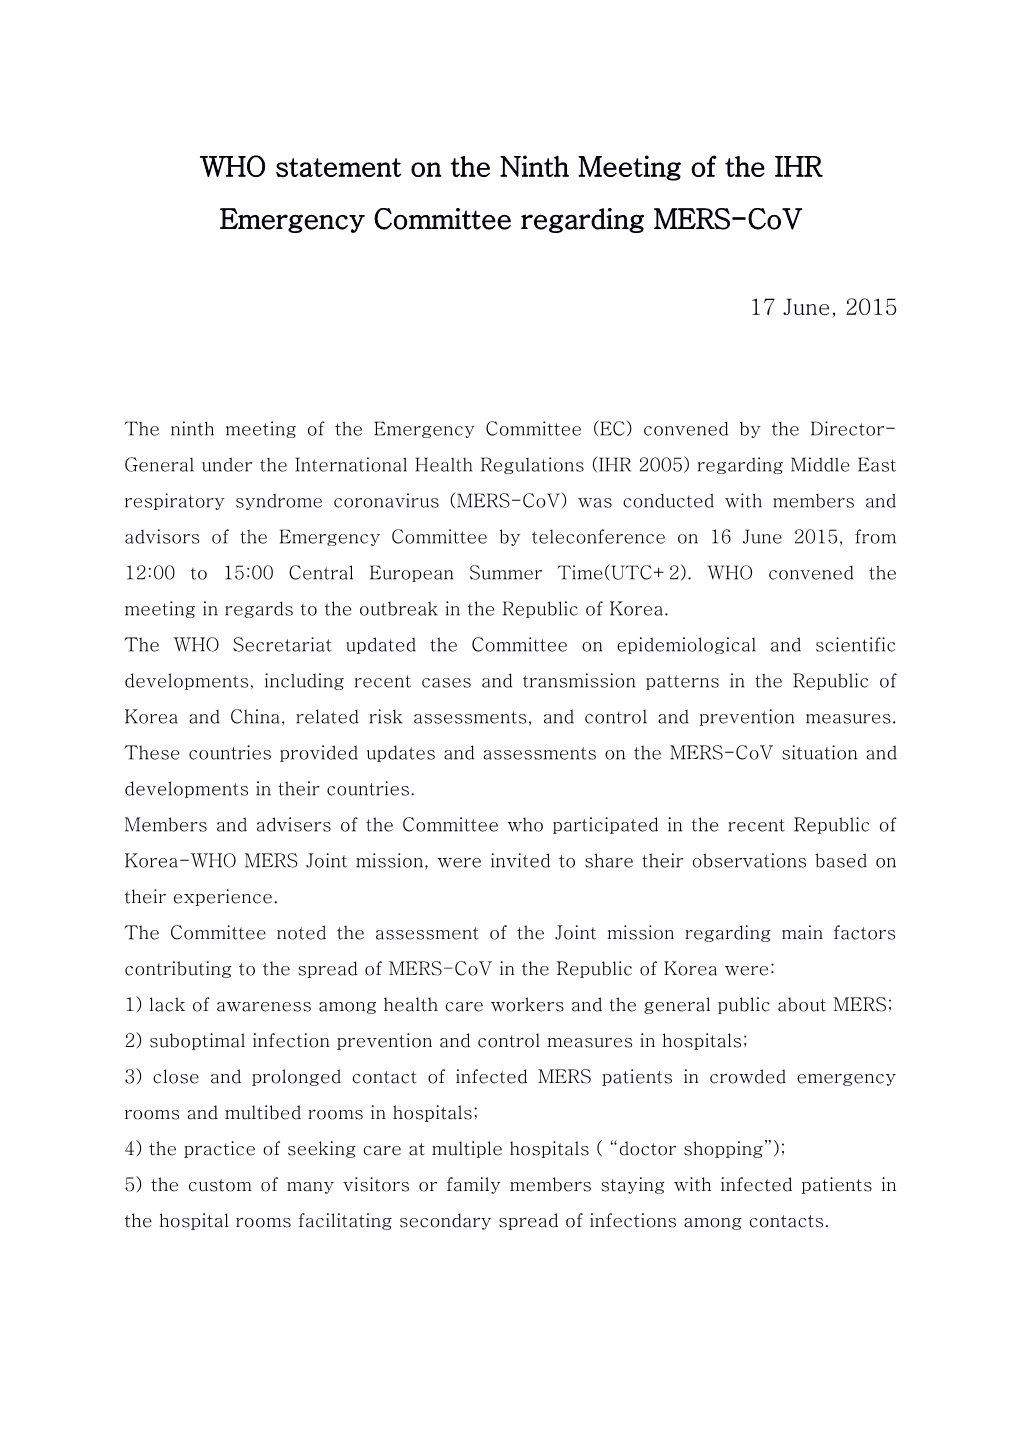 WHO Statement on the Ninth Meeting of the IHR Emergency Committee Regarding MERS-Cov